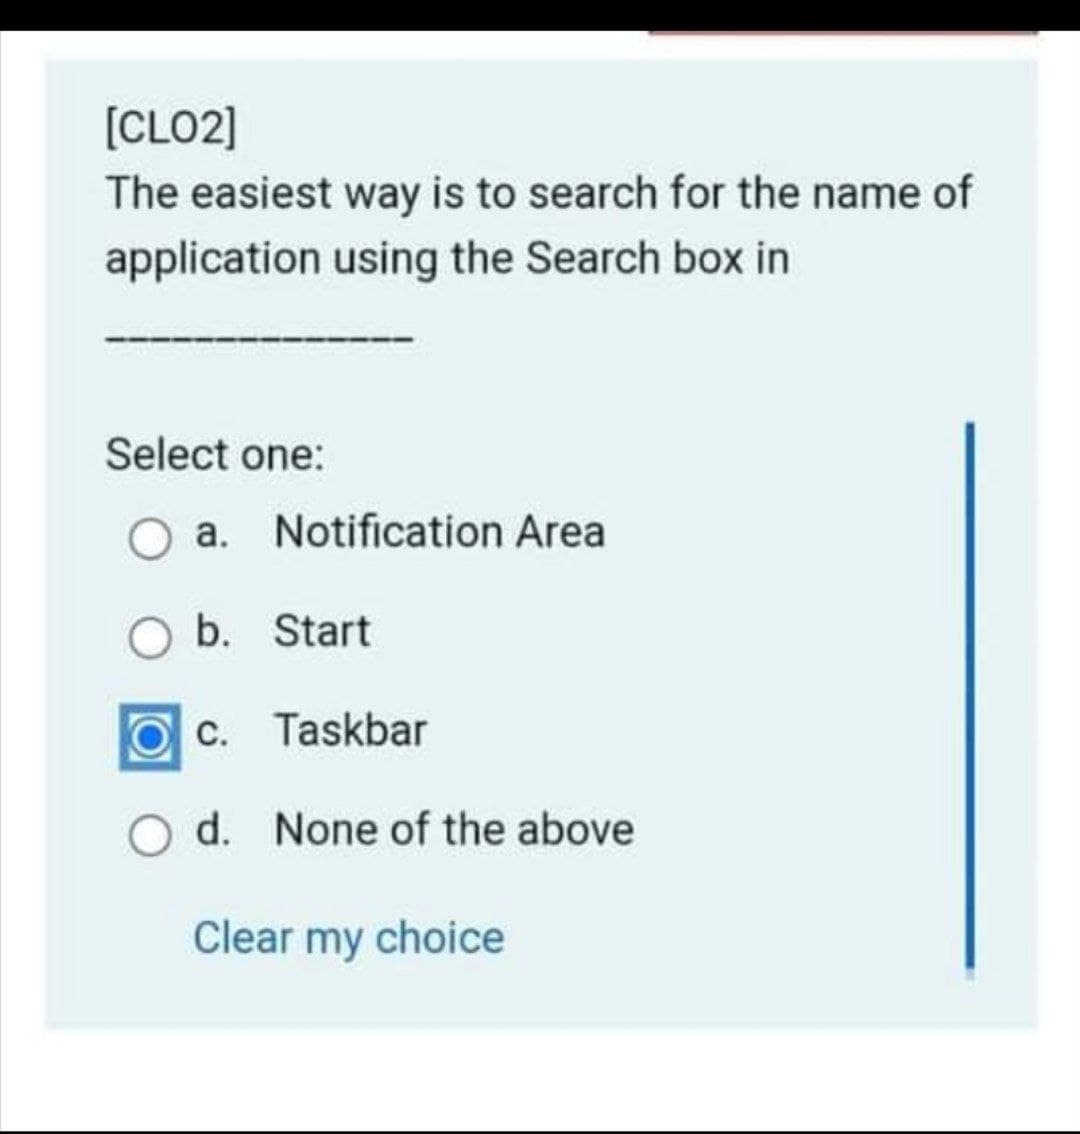 [CLO2]
The easiest way is to search for the name of
application using the Search box in
Select one:
O a. Notification Area
b. Start
C. Taskbar
d. None of the above
Clear my choice
